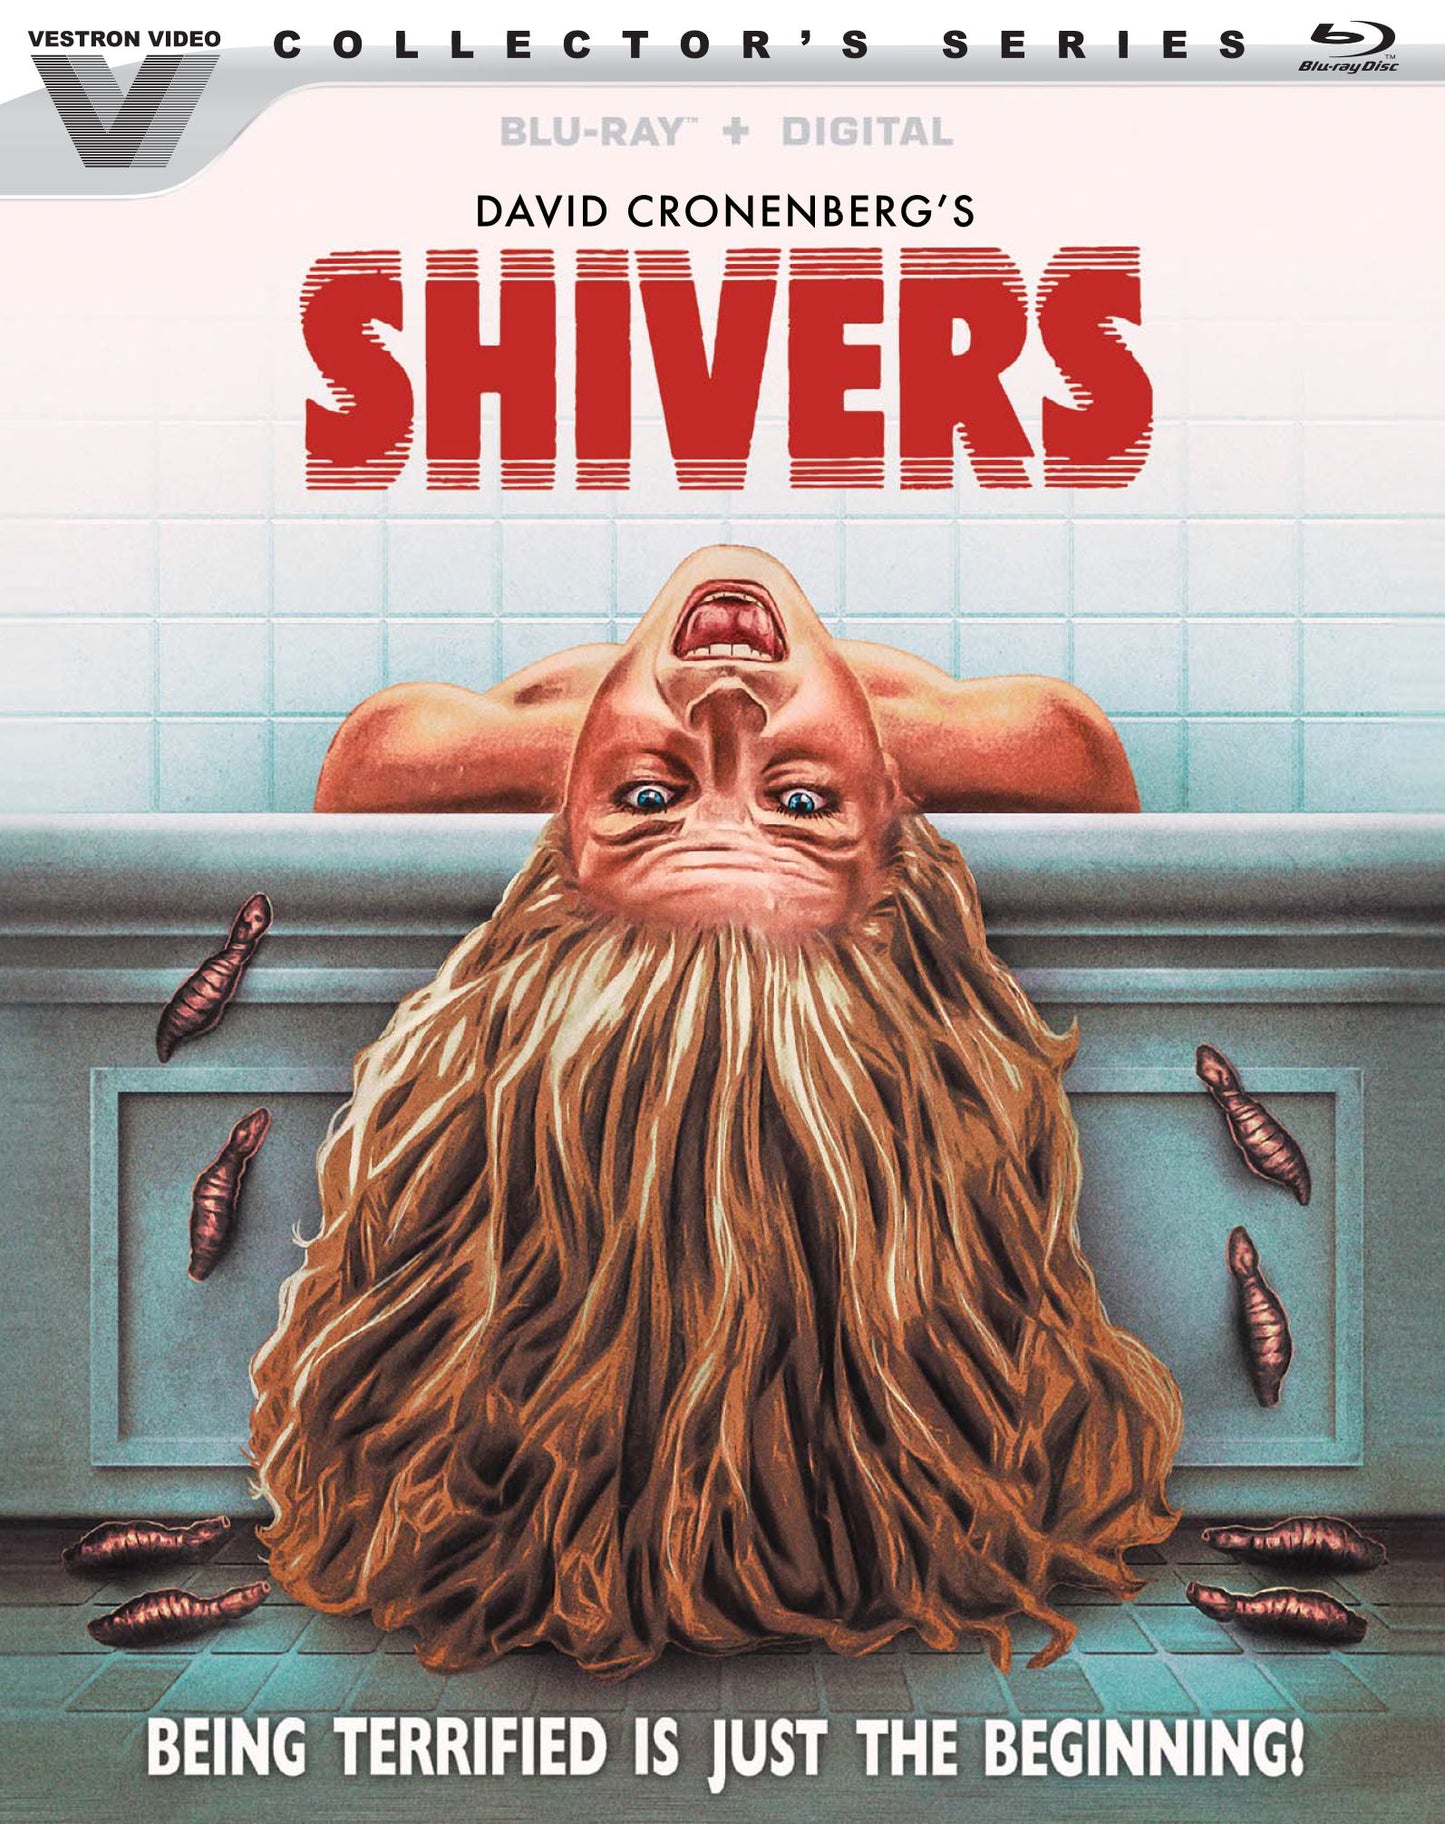 Shivers [Includes Digital Copy] [Blu-ray] cover art